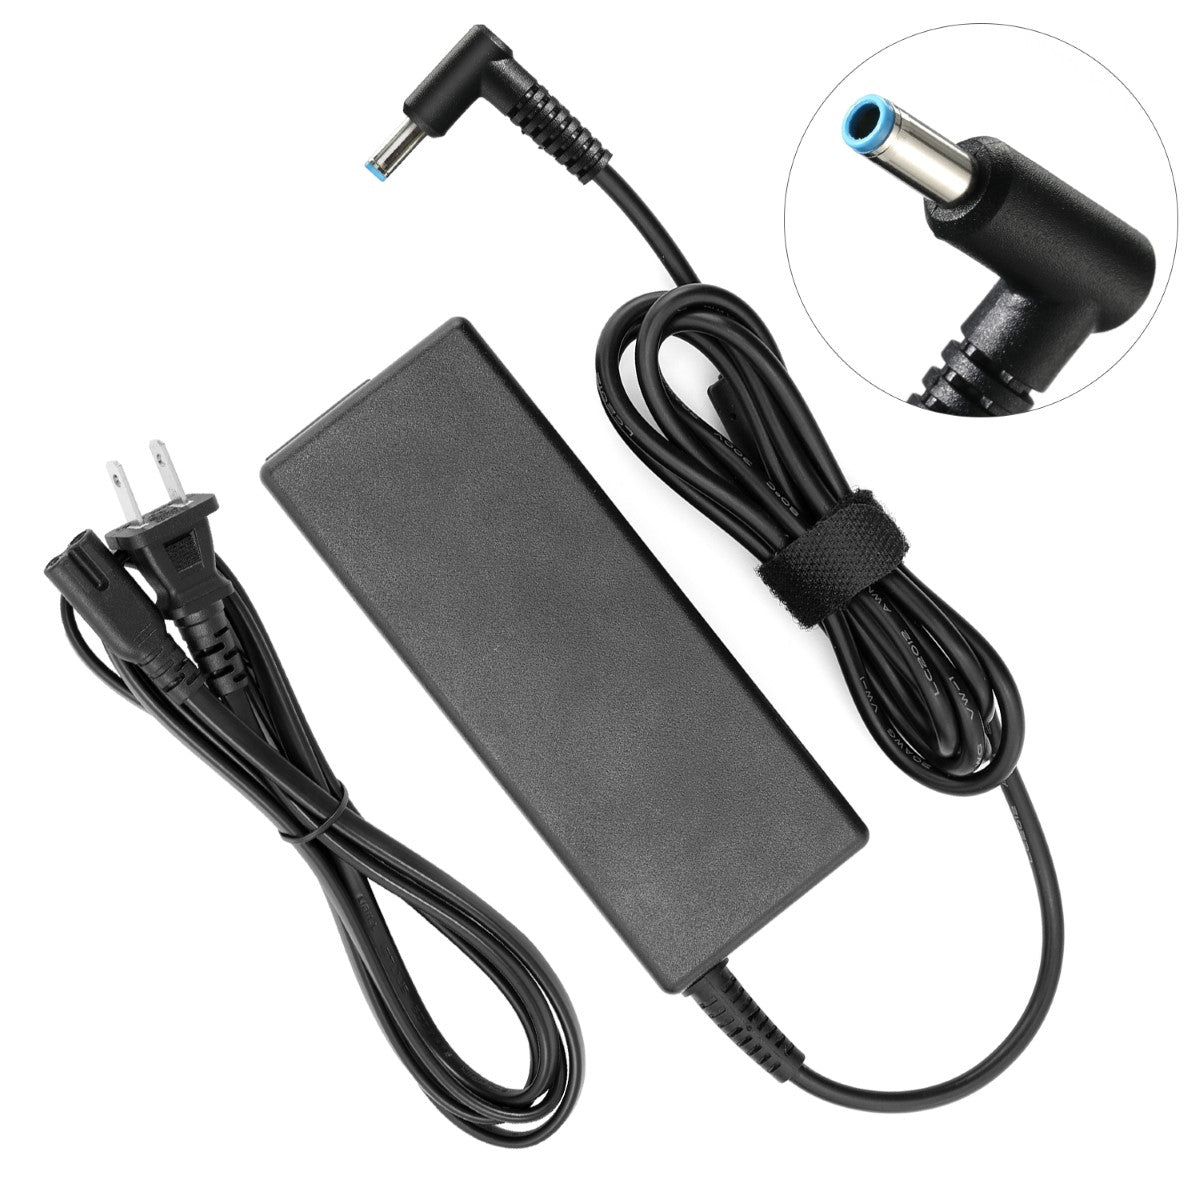 AC Adapter Charger for hp Envy Touchsmart 15-k163cl Notebook.